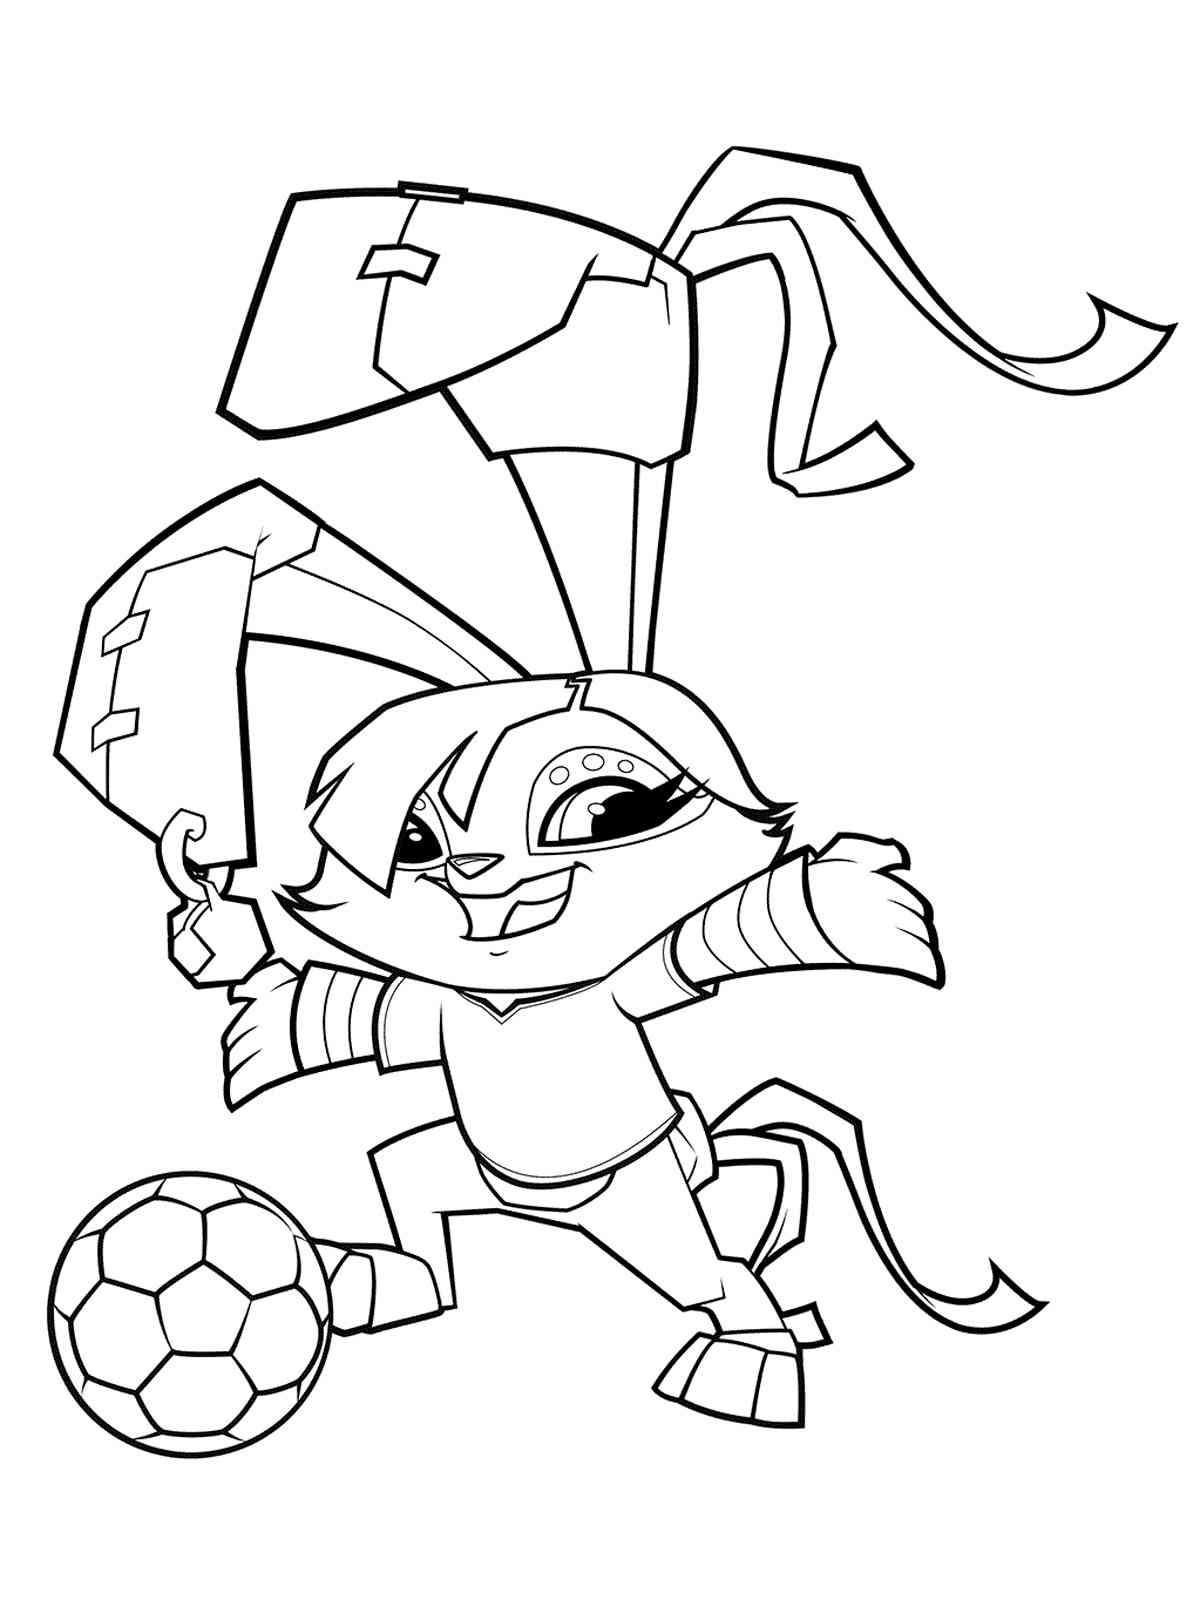 Peck the Rabbit Alpha Animal Jam coloring page